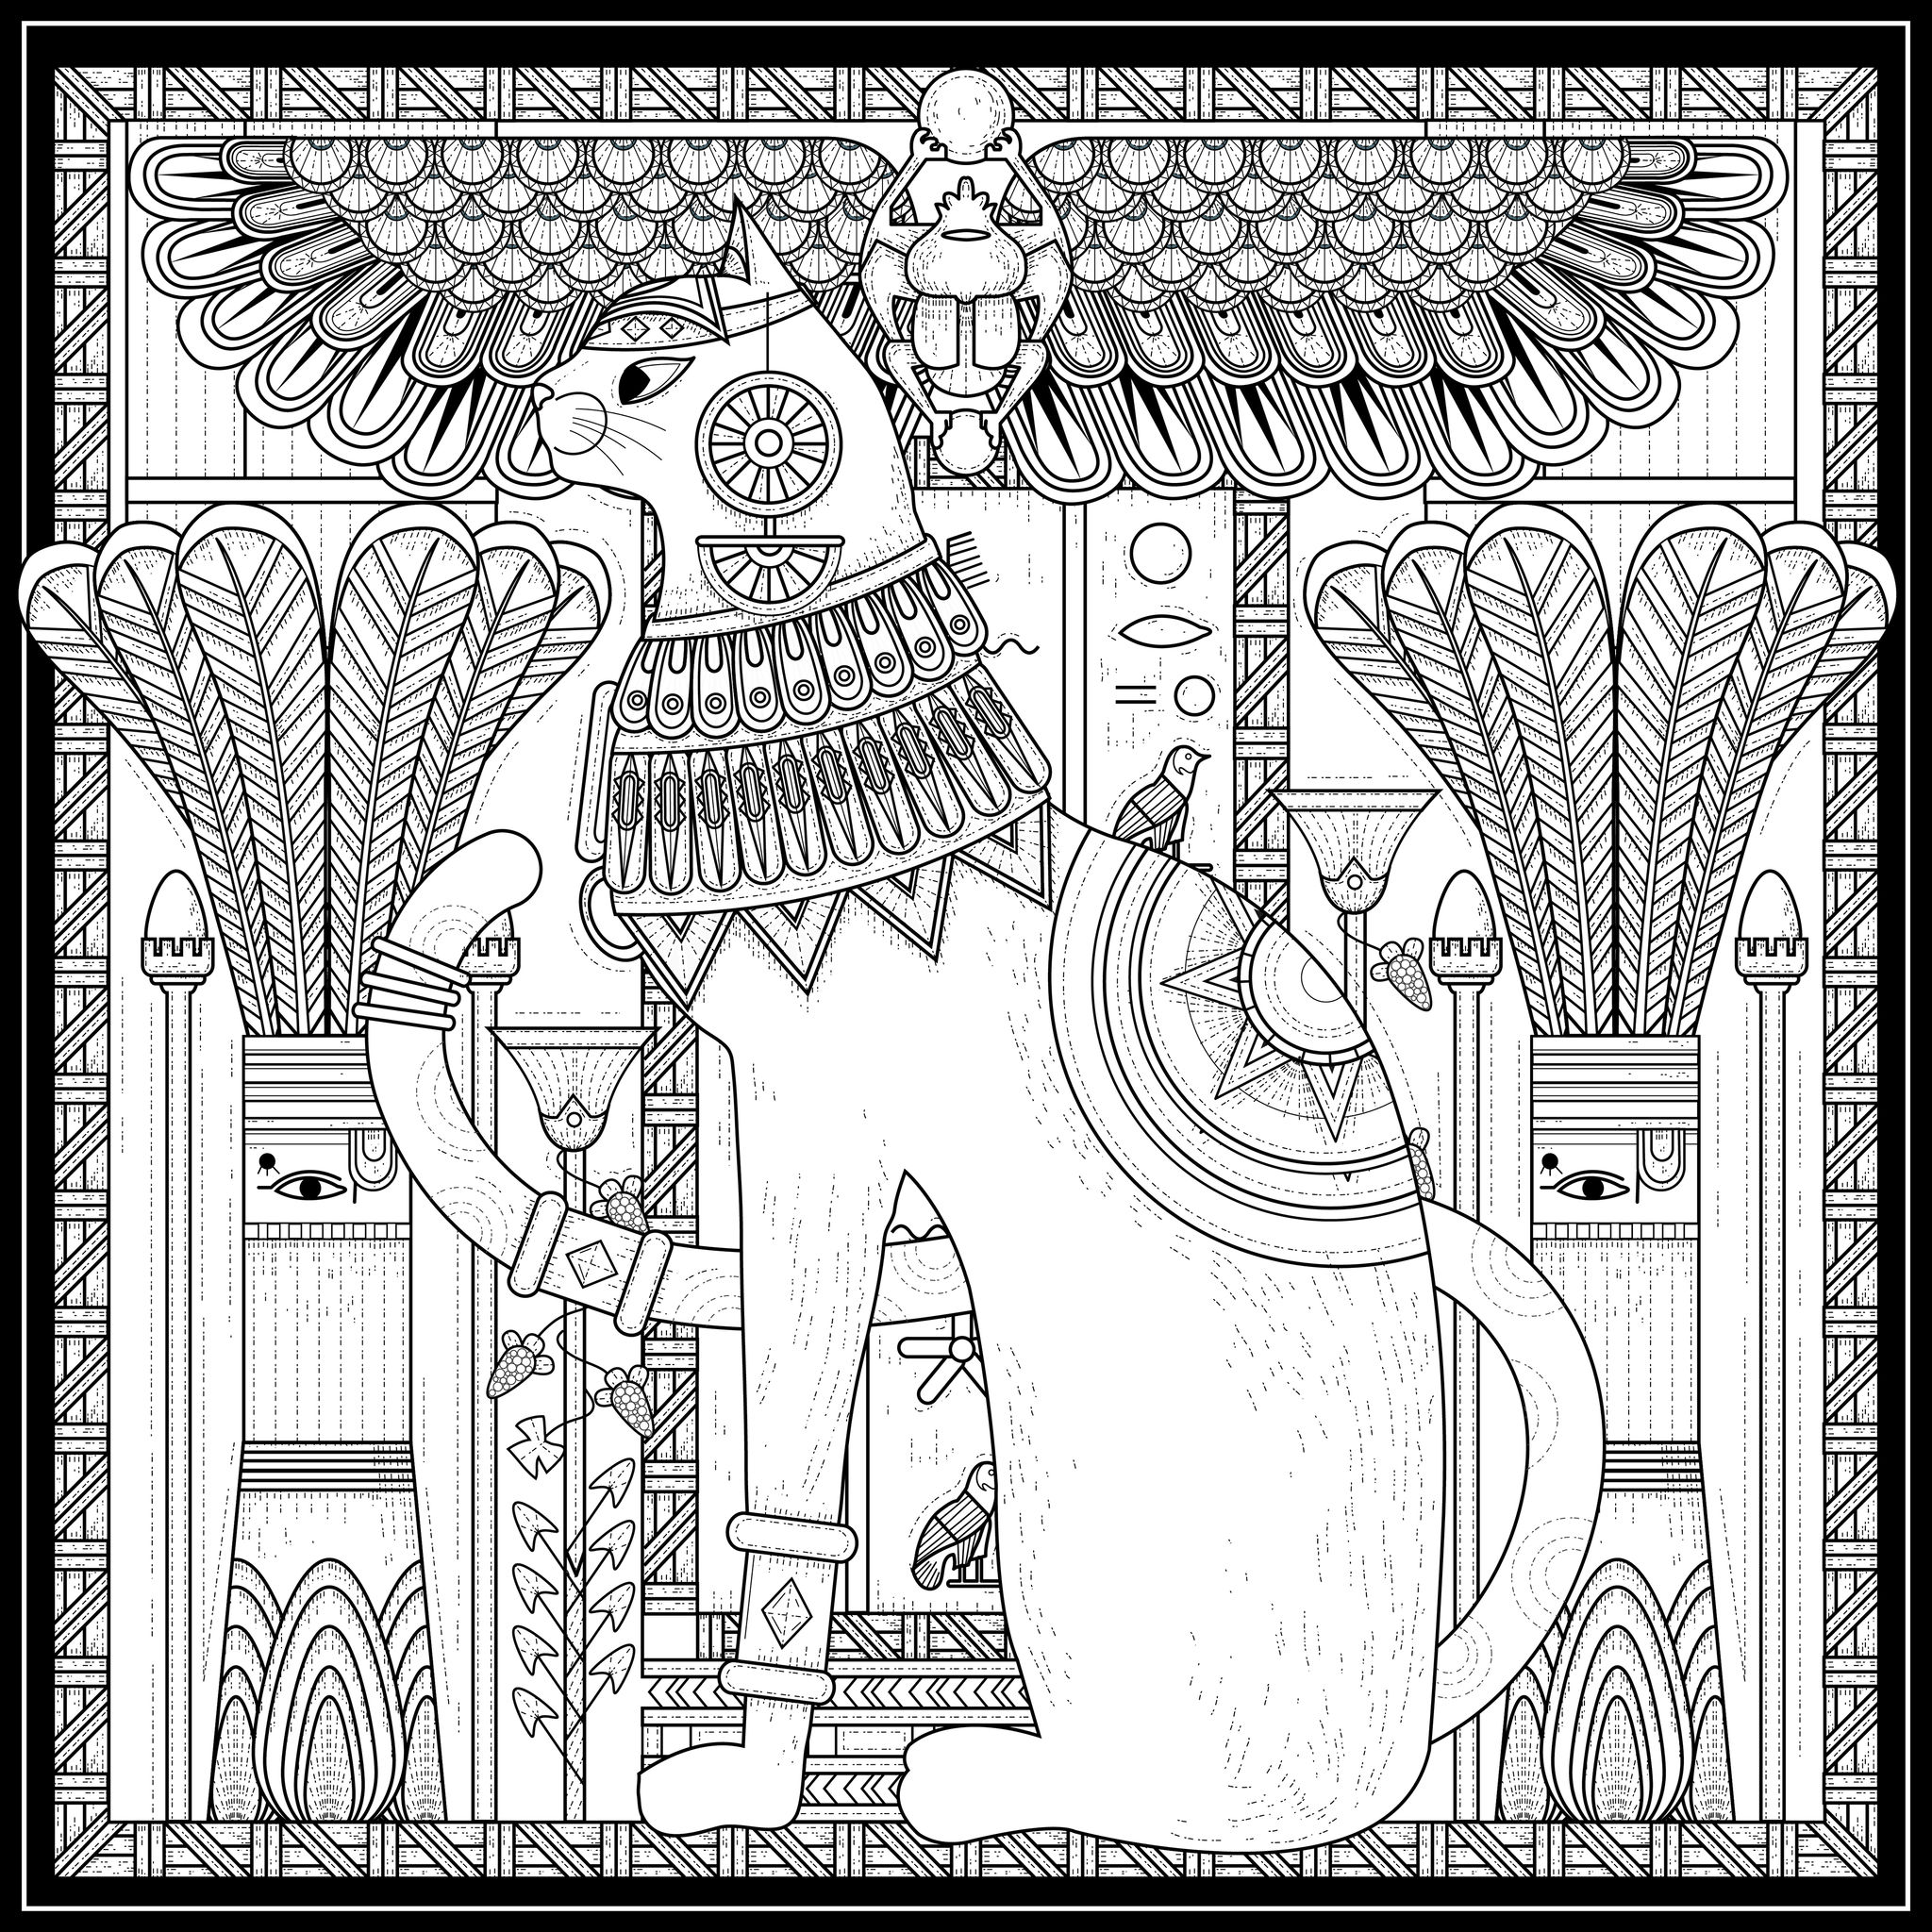 Egypt cat egyptian style and symbols - Egypt Adult Coloring Pages